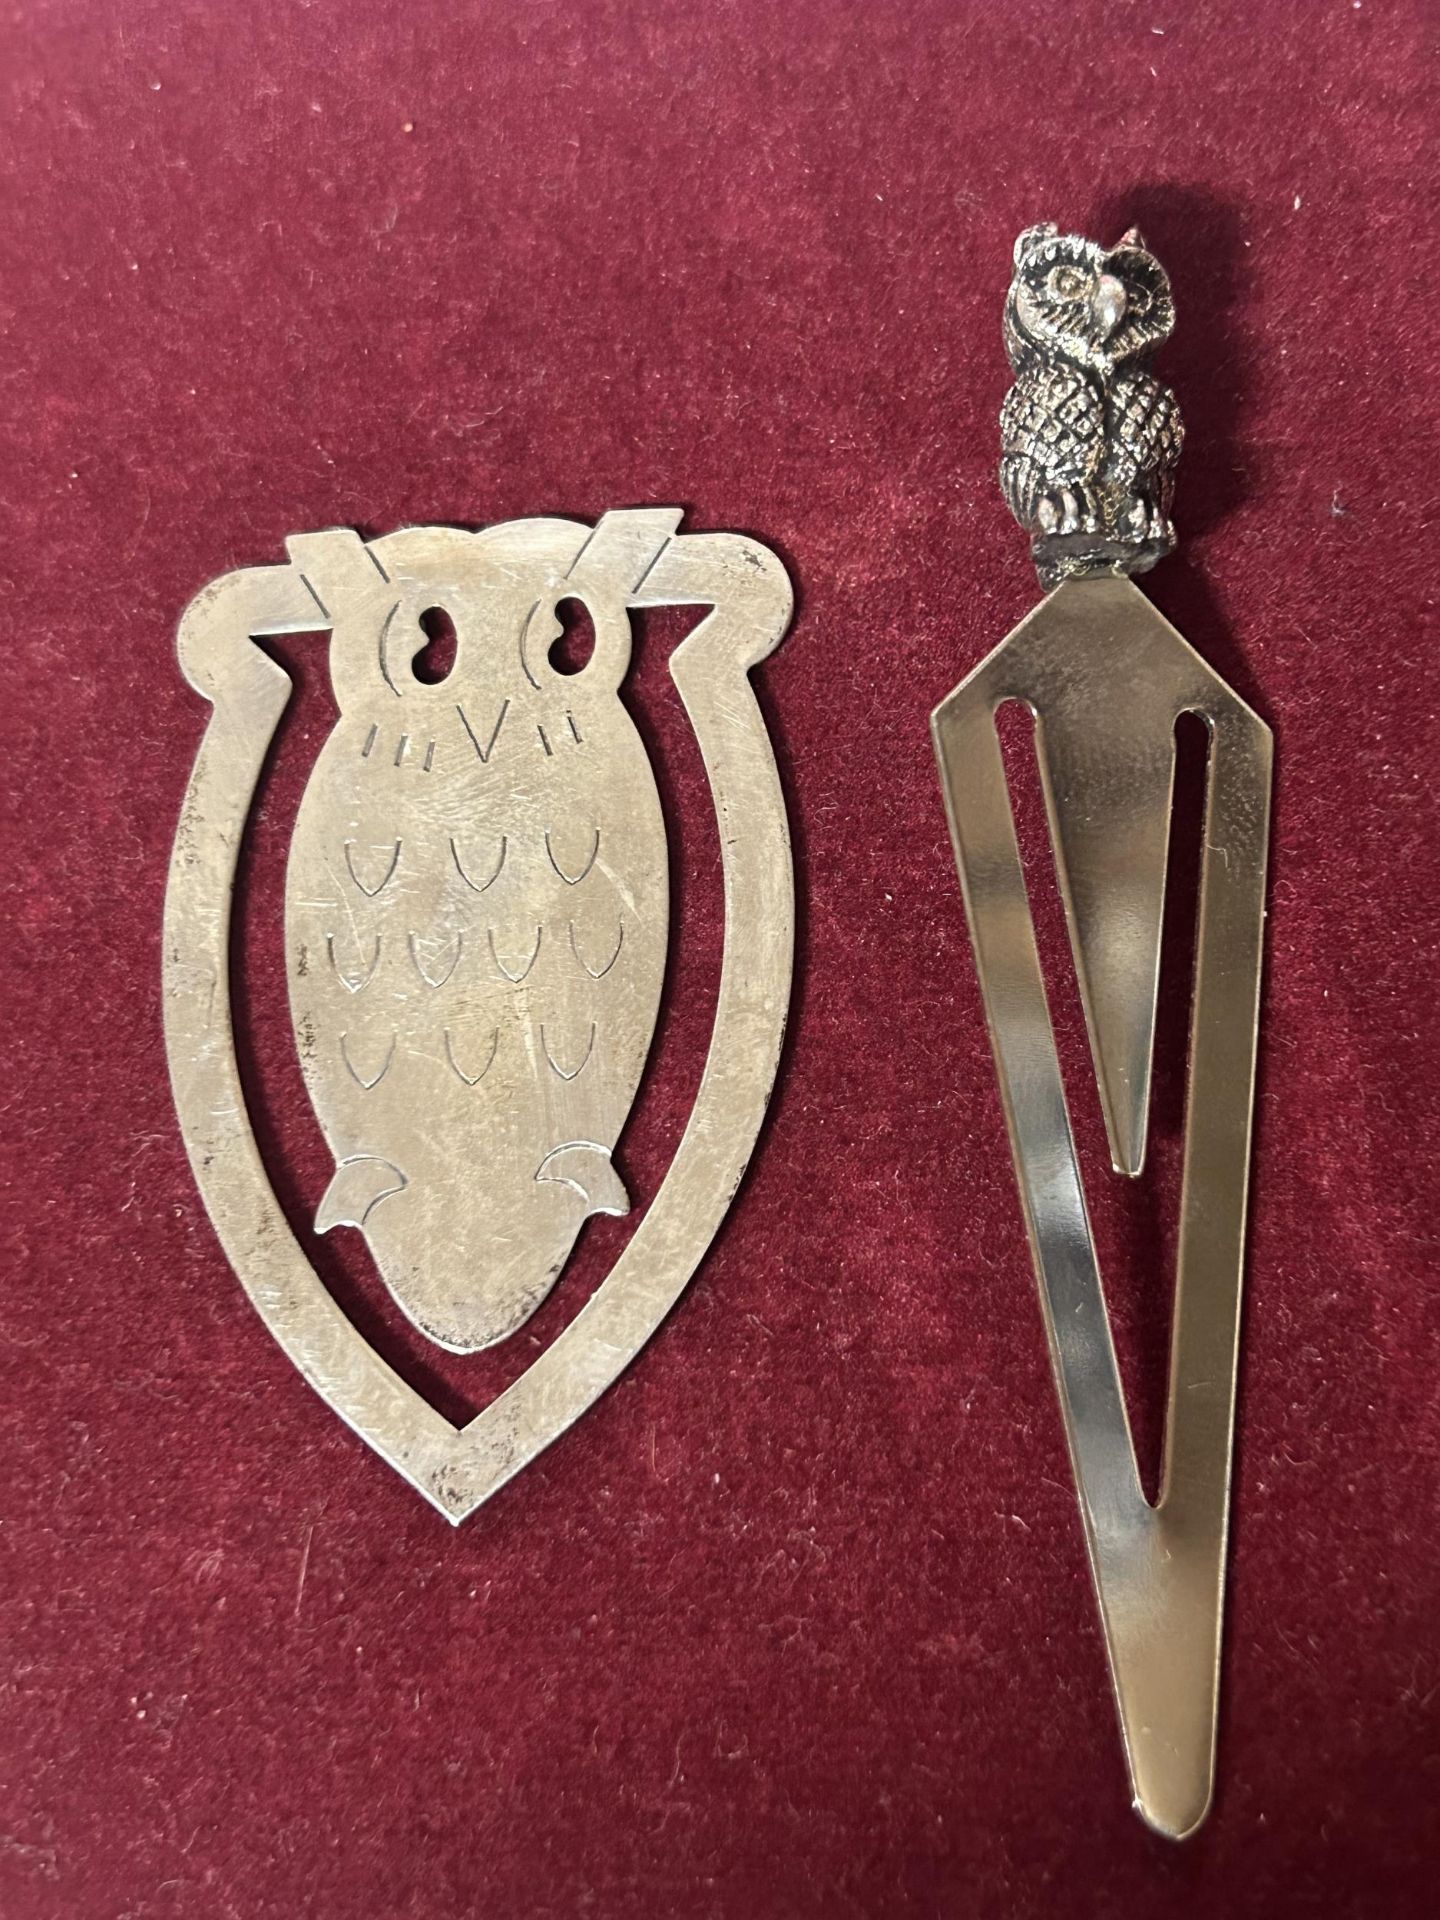 TWO OWL BOOKMARKS, ONE HALLMARKED SILVER AND ONE WHITE METAL